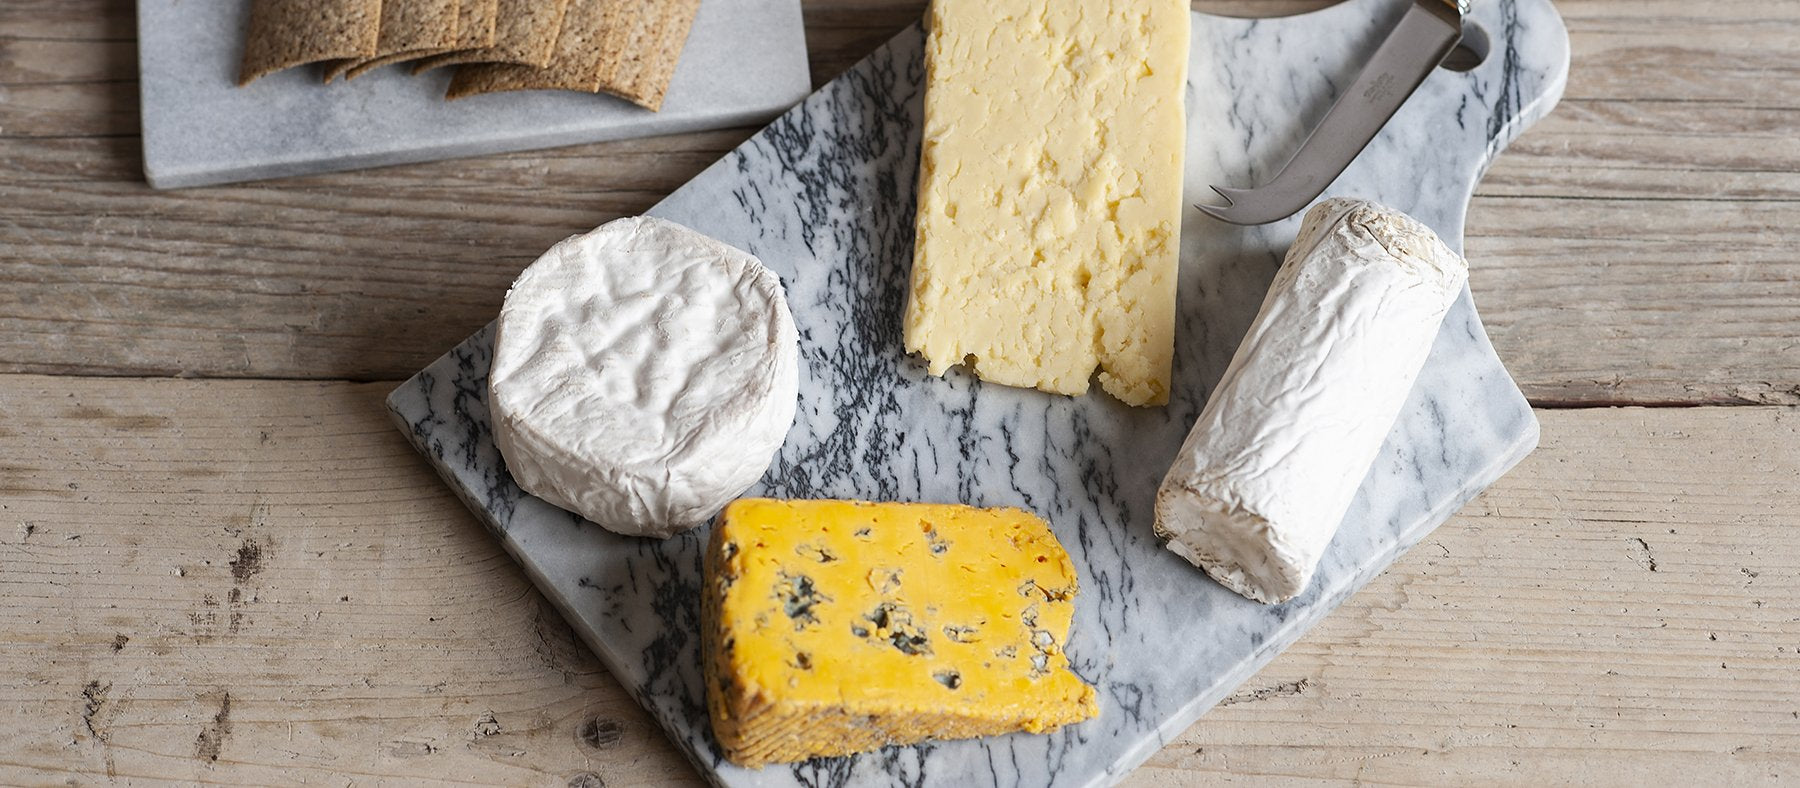 Cheeseboard staples for the fridge, everyday cheese